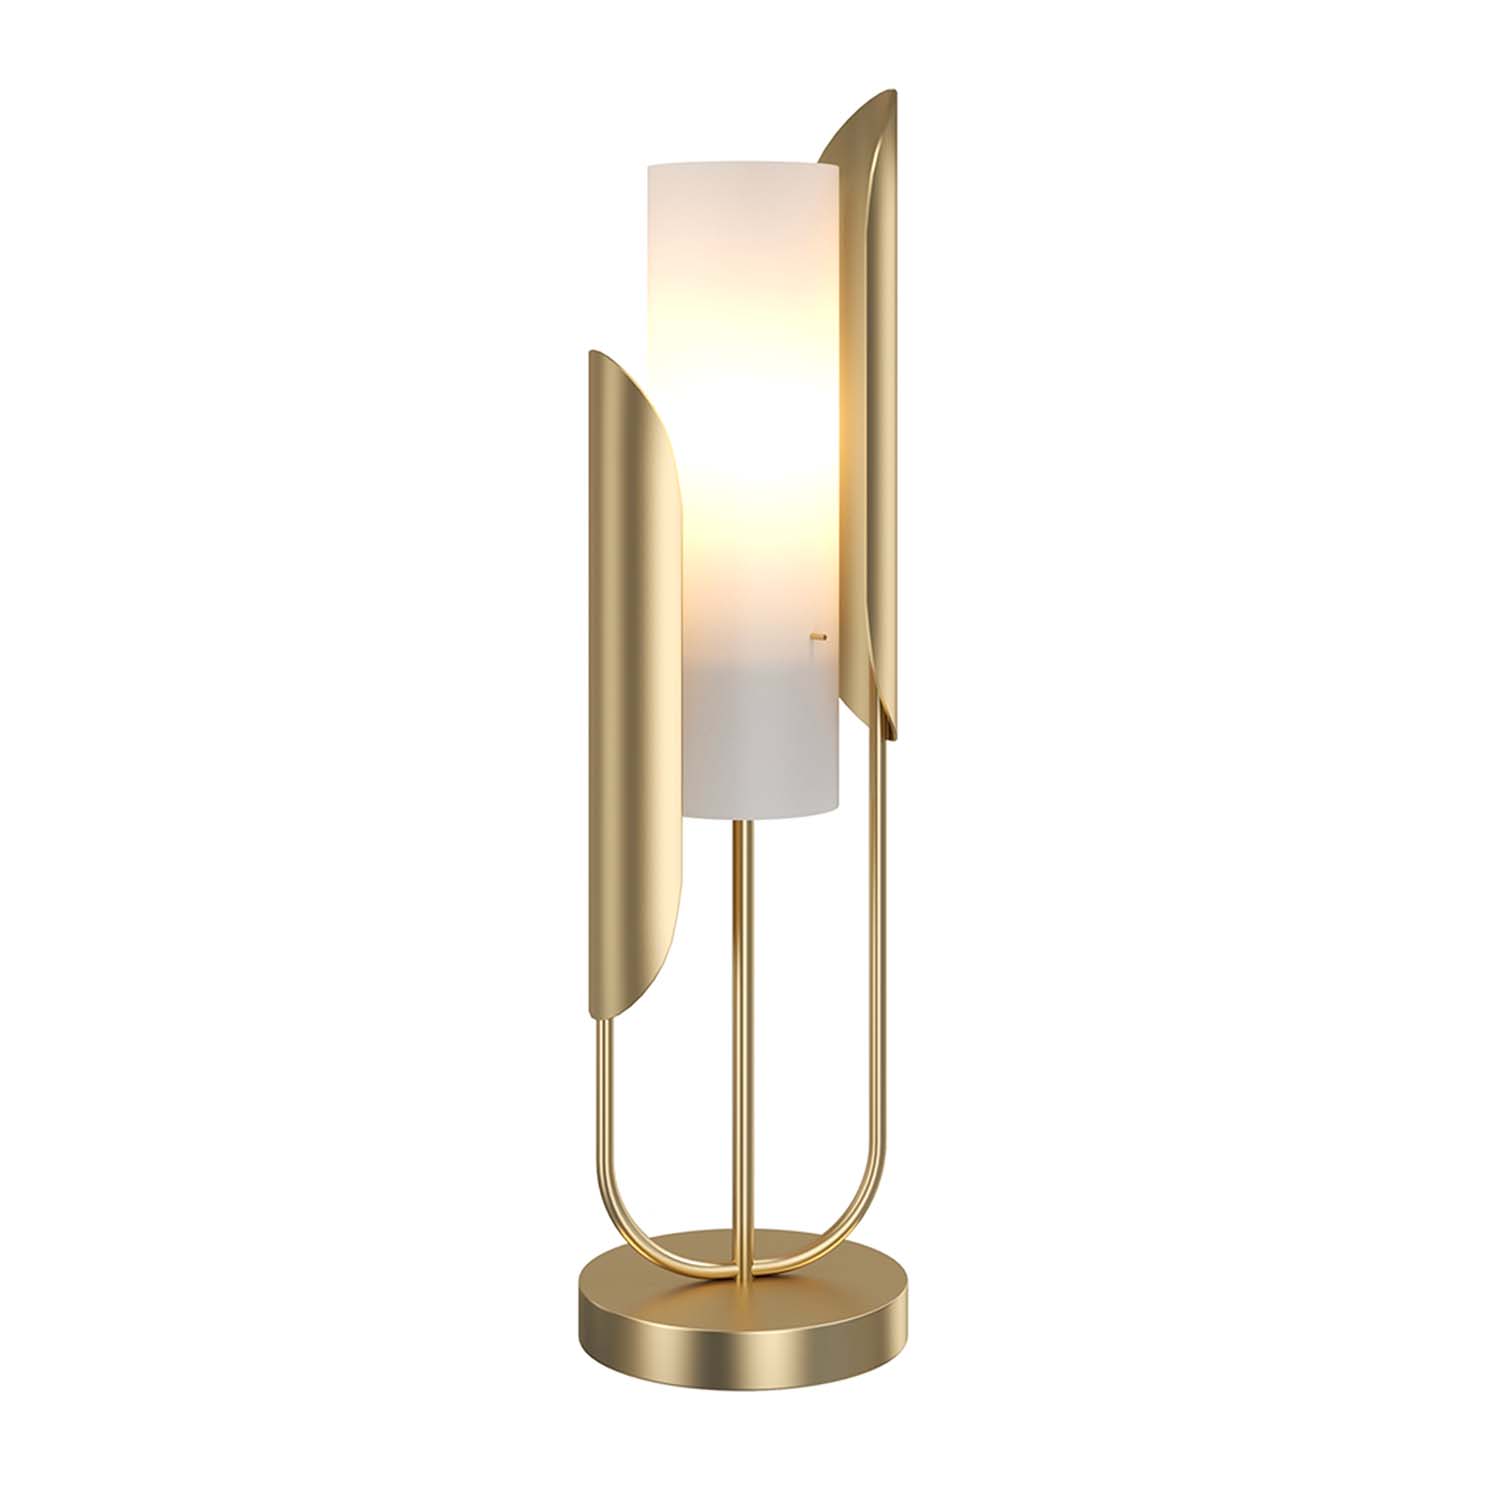 CIPRESSO - Living room lamp in brass steel and opaque glass